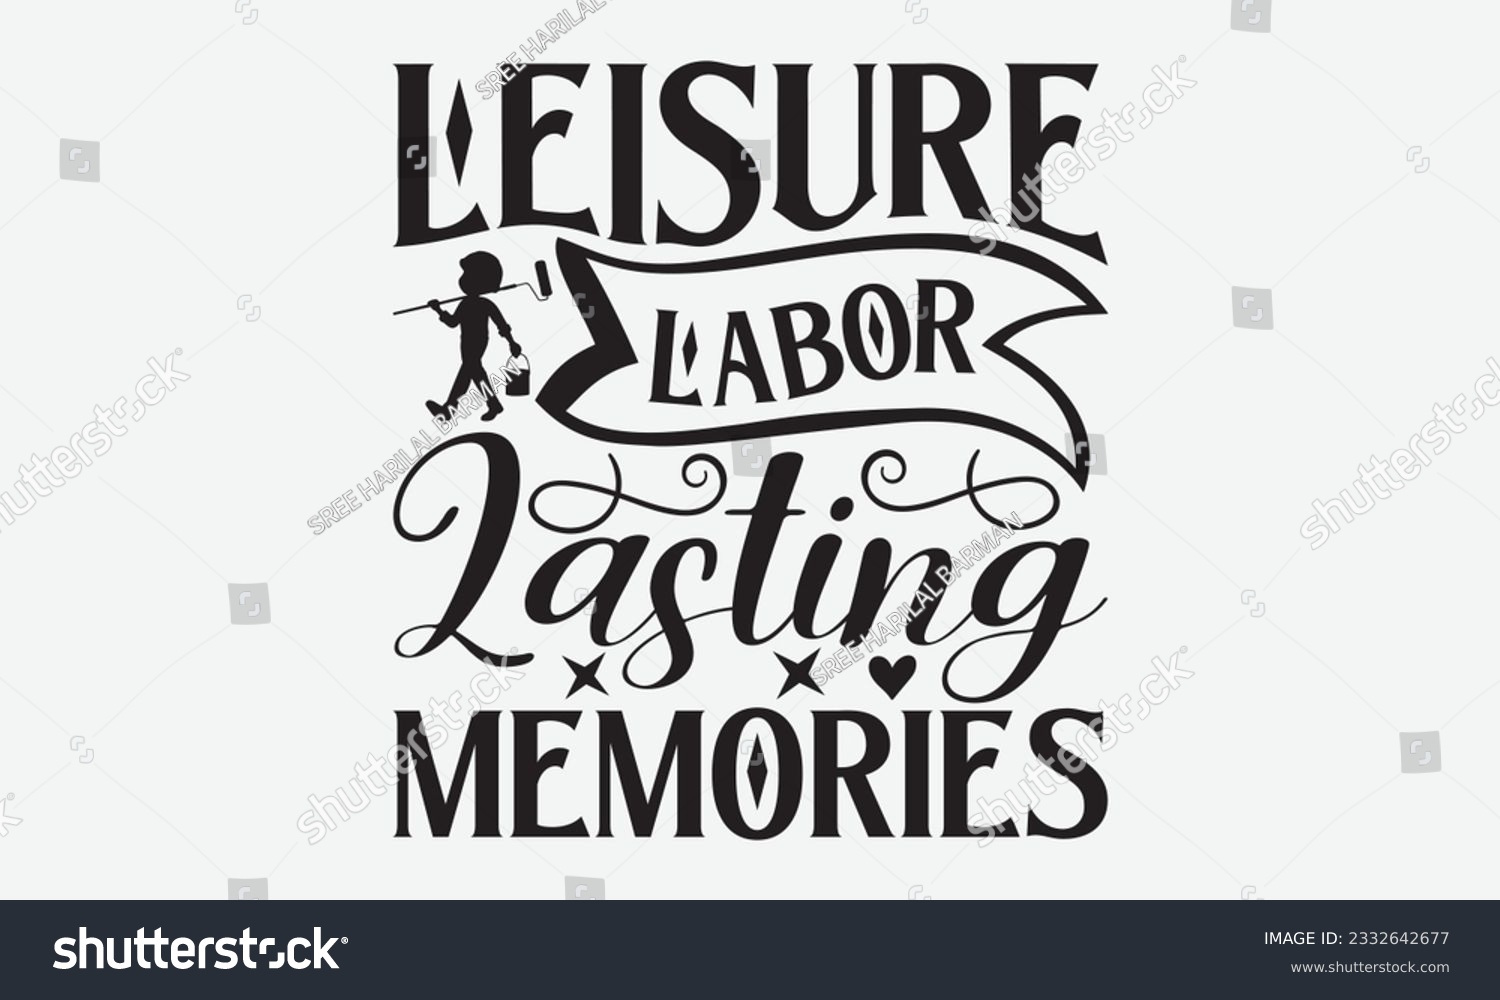 SVG of Leisure Labor Lasting Memories - Labor svg typography t-shirt design. celebration in calligraphy text or font Labor in the Middle East. Greeting cards, templates, and mugs. EPS 10. svg